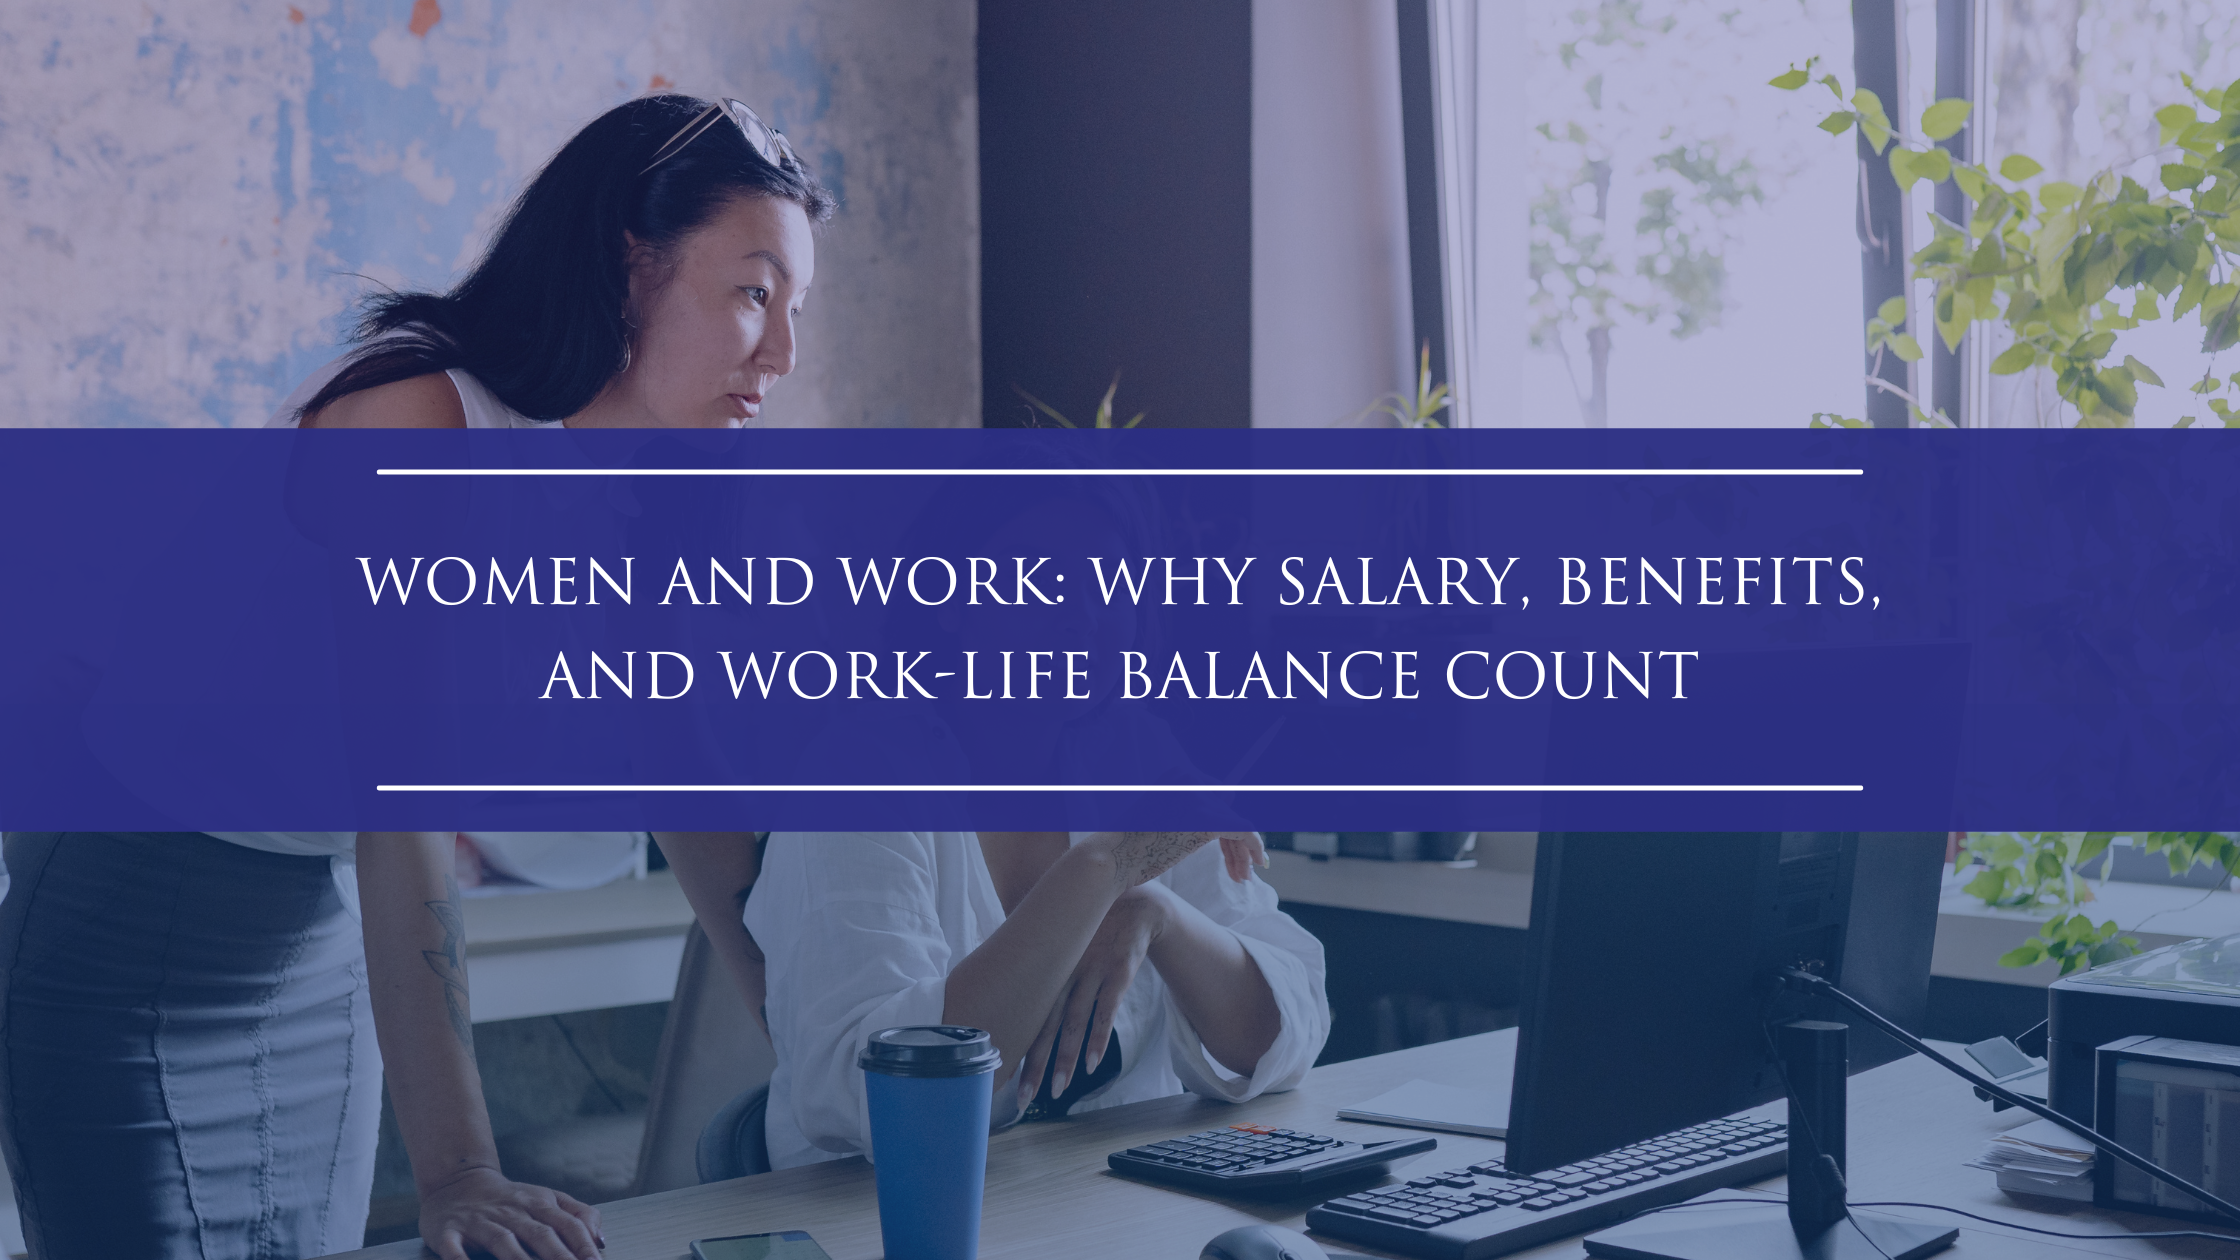 Women and Work: Why Salary, Benefits, and Work-Life Balance Count